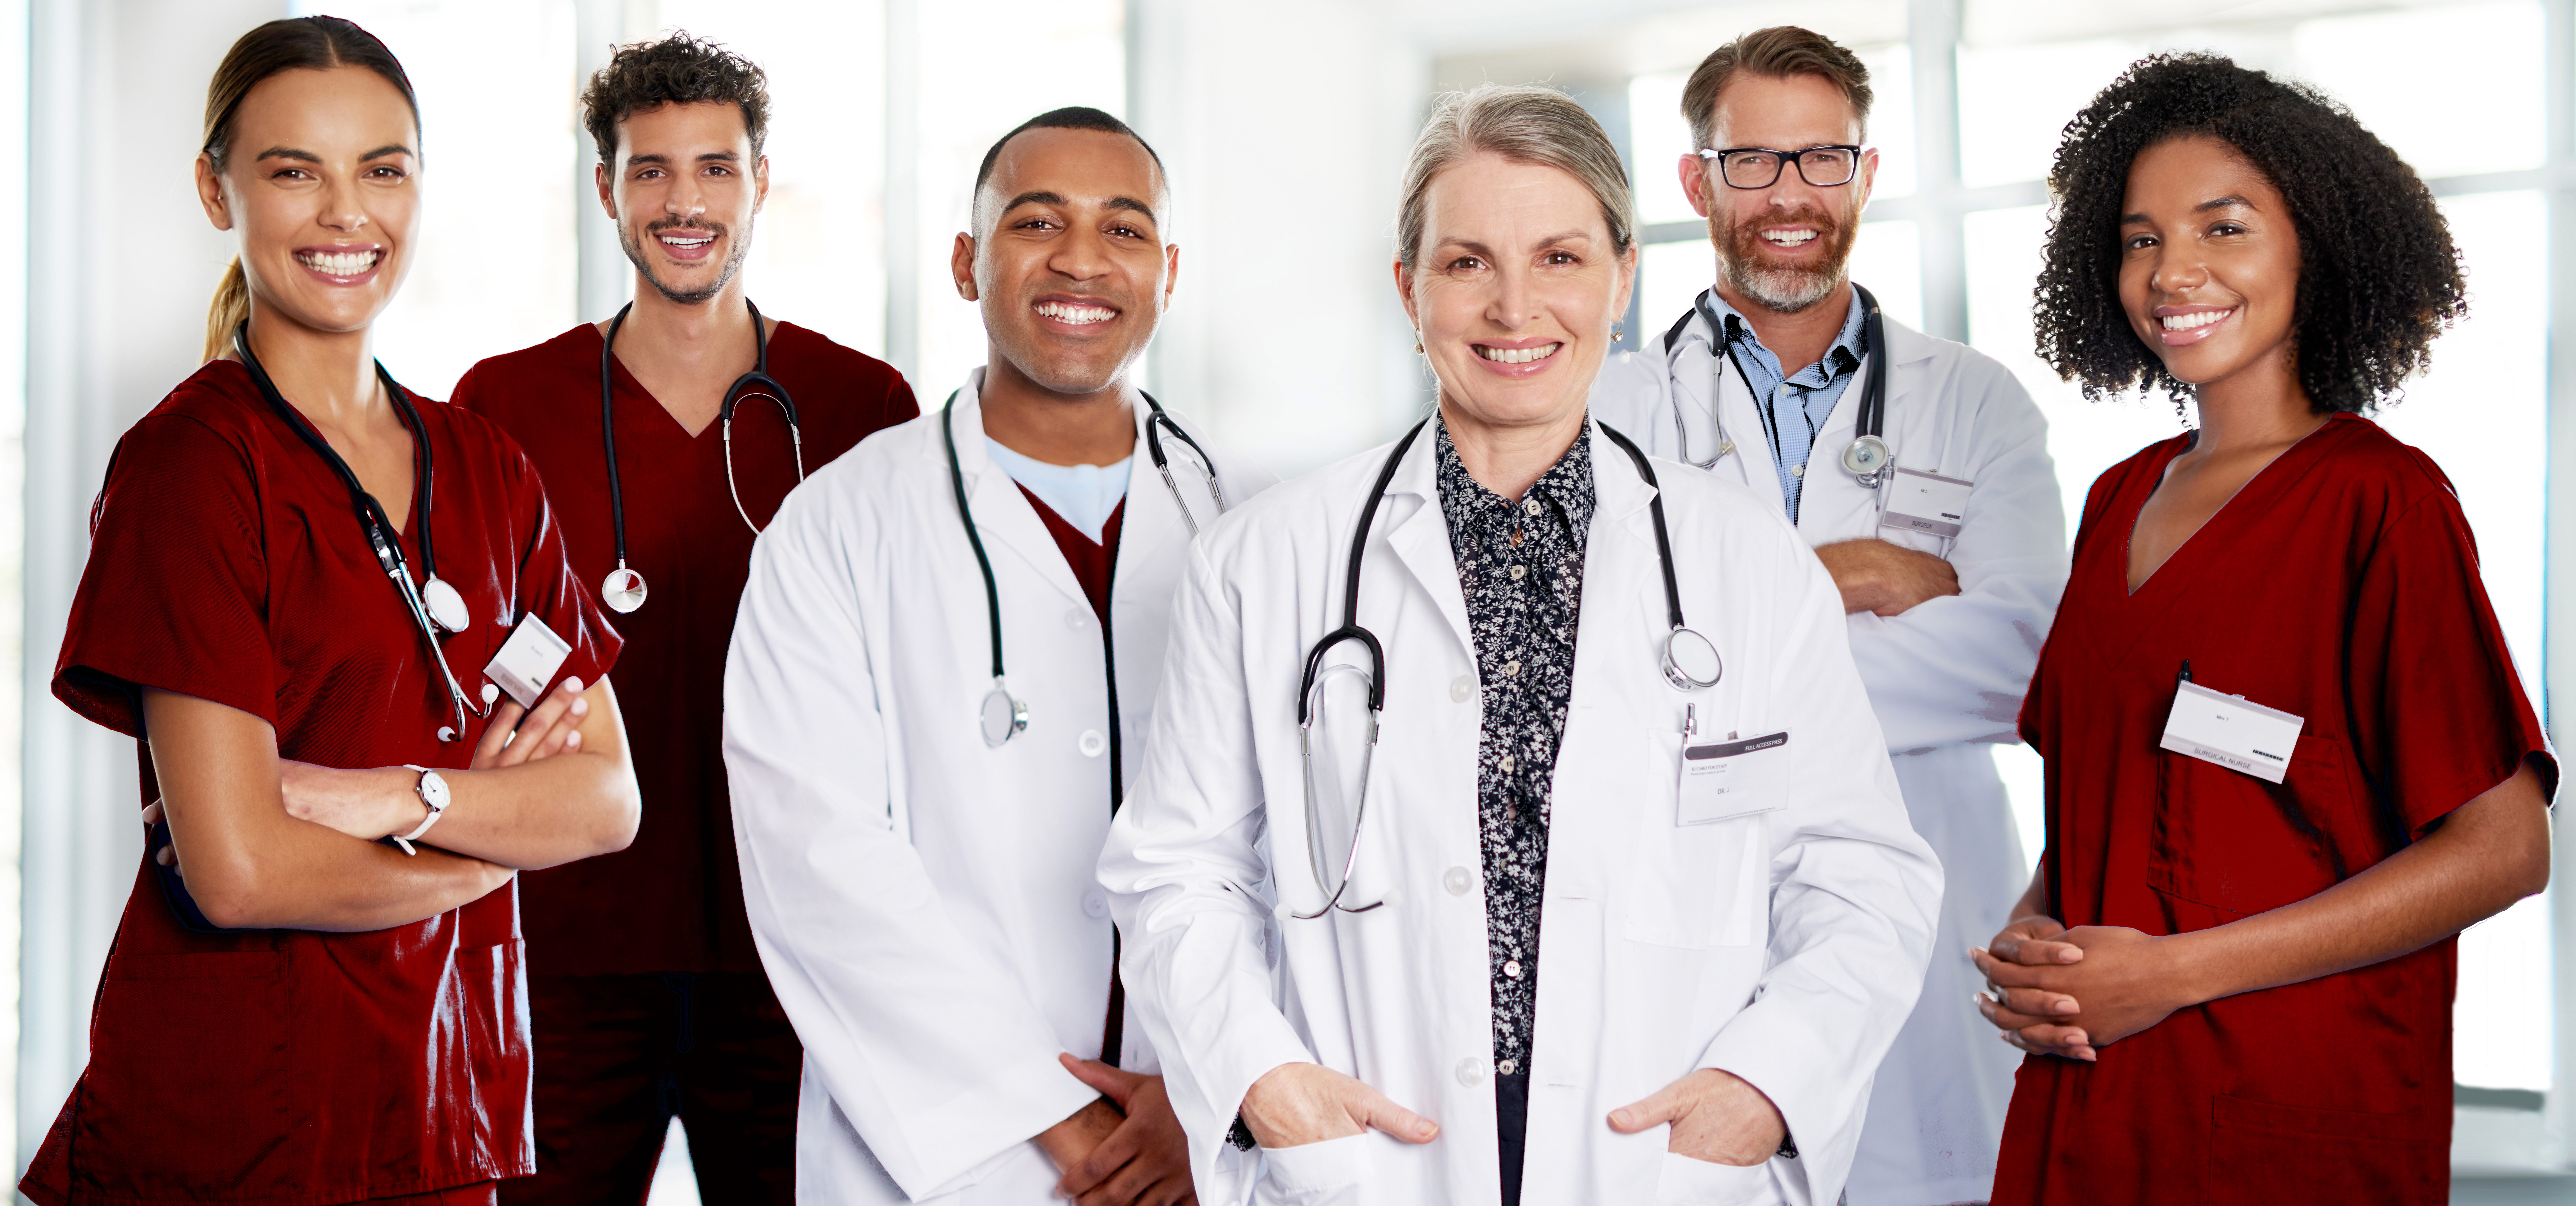 Six osteopathic medical professionals in scrubs and white coats